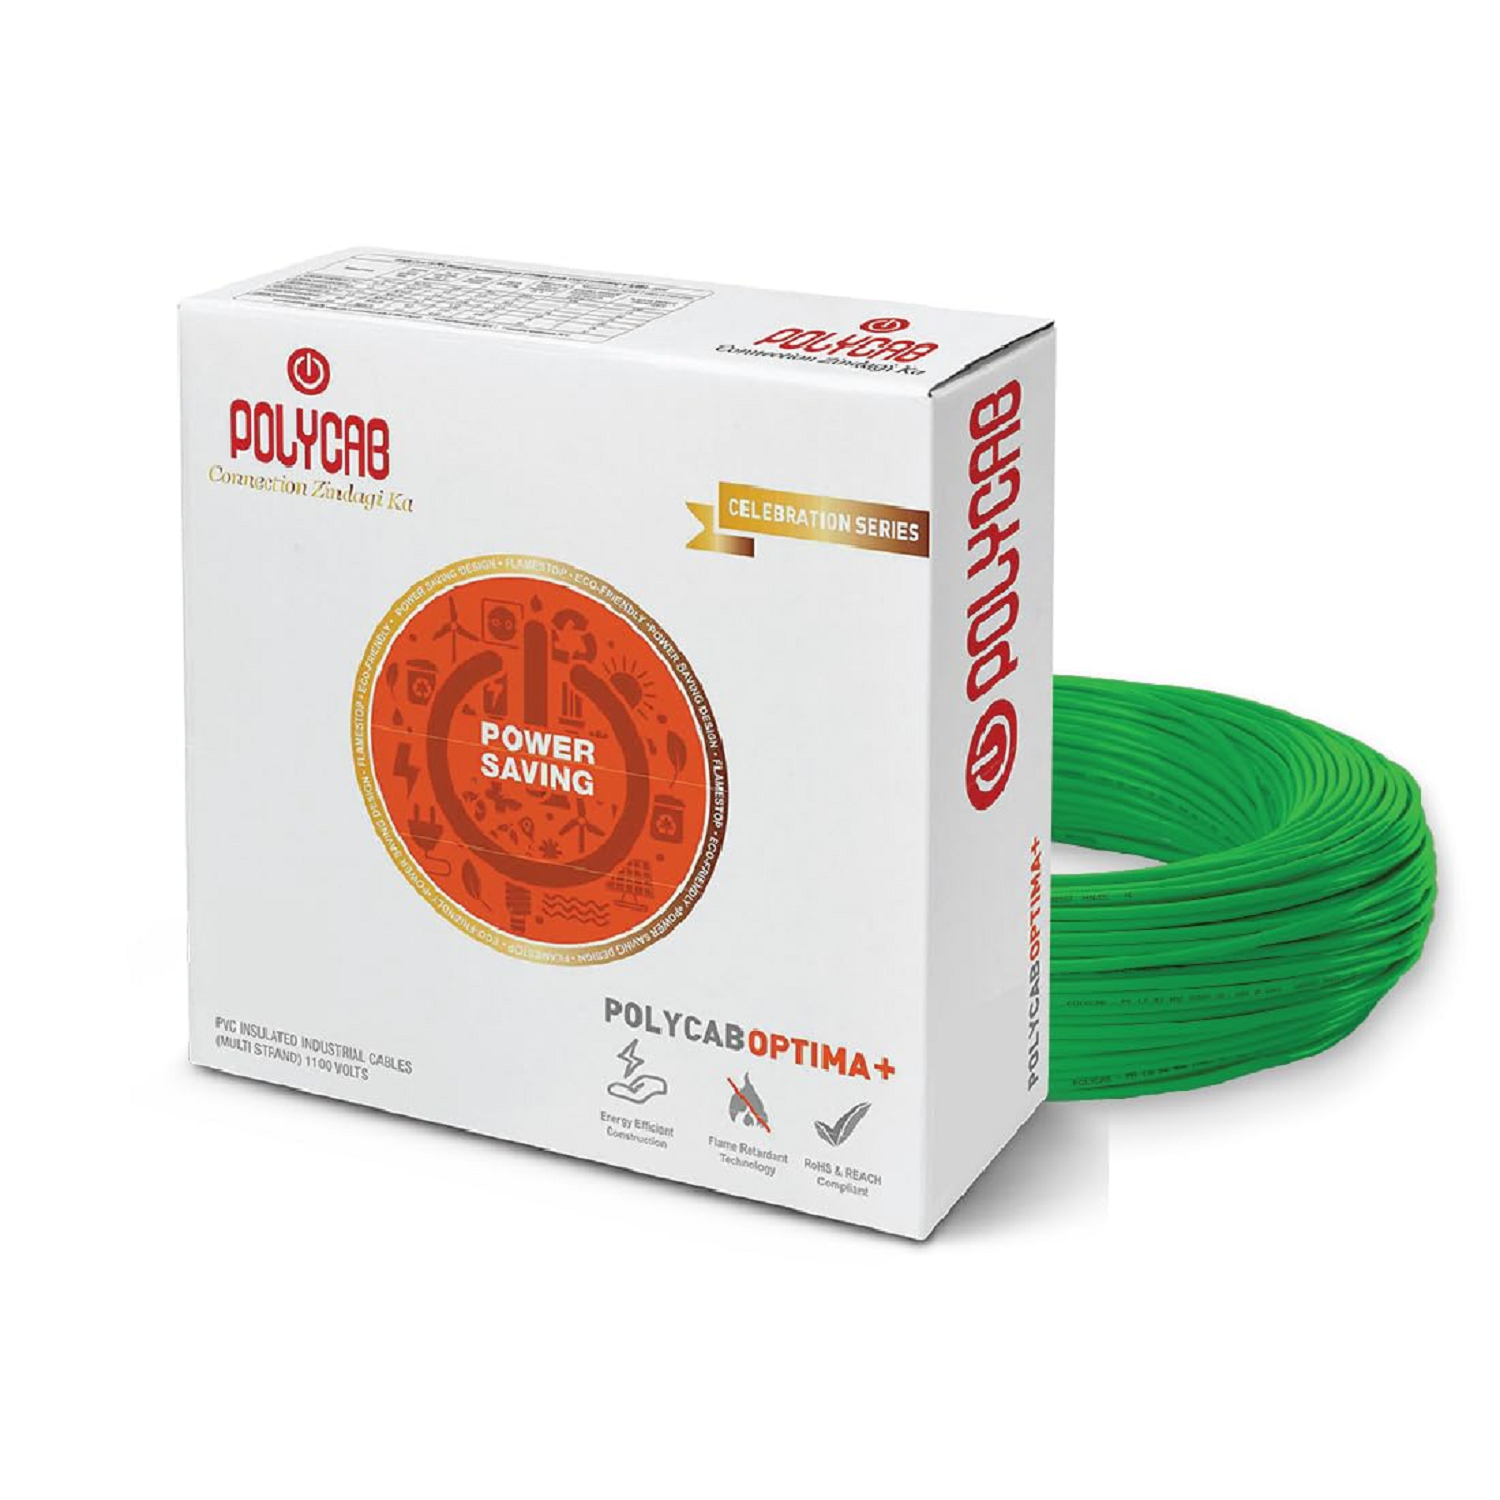 Polycab Optima Plus FR-LF 0.75 SQ-MM, 90 Meters PVC Insulated Copper Wire Single Core (Green)